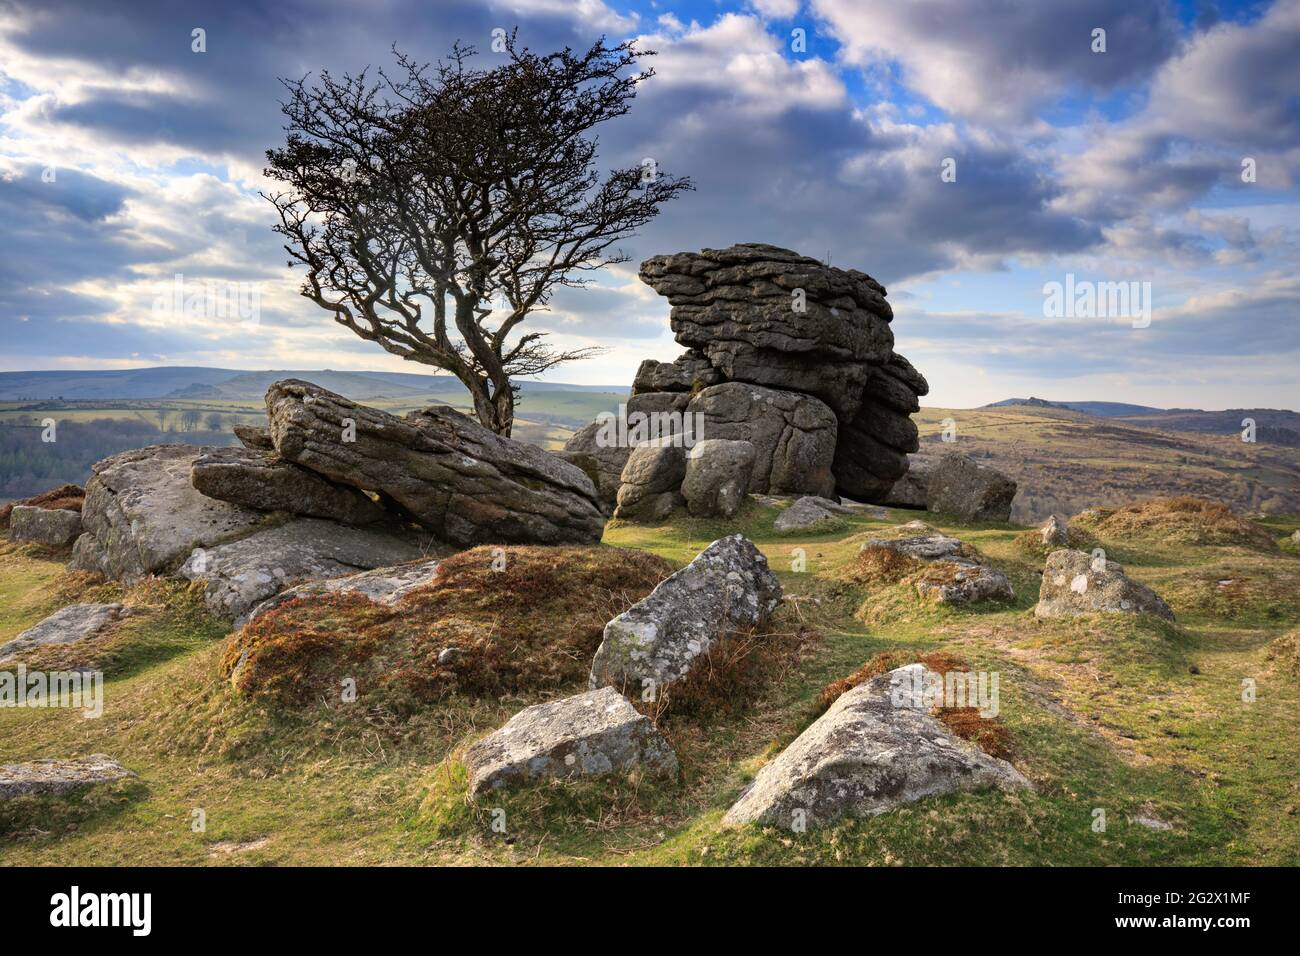 The photograph features evening light on the lone hawthorn tree at Emsworthy Rocks, near Saddle Tor in the Dartmoor National Park in Devon. Stock Photo